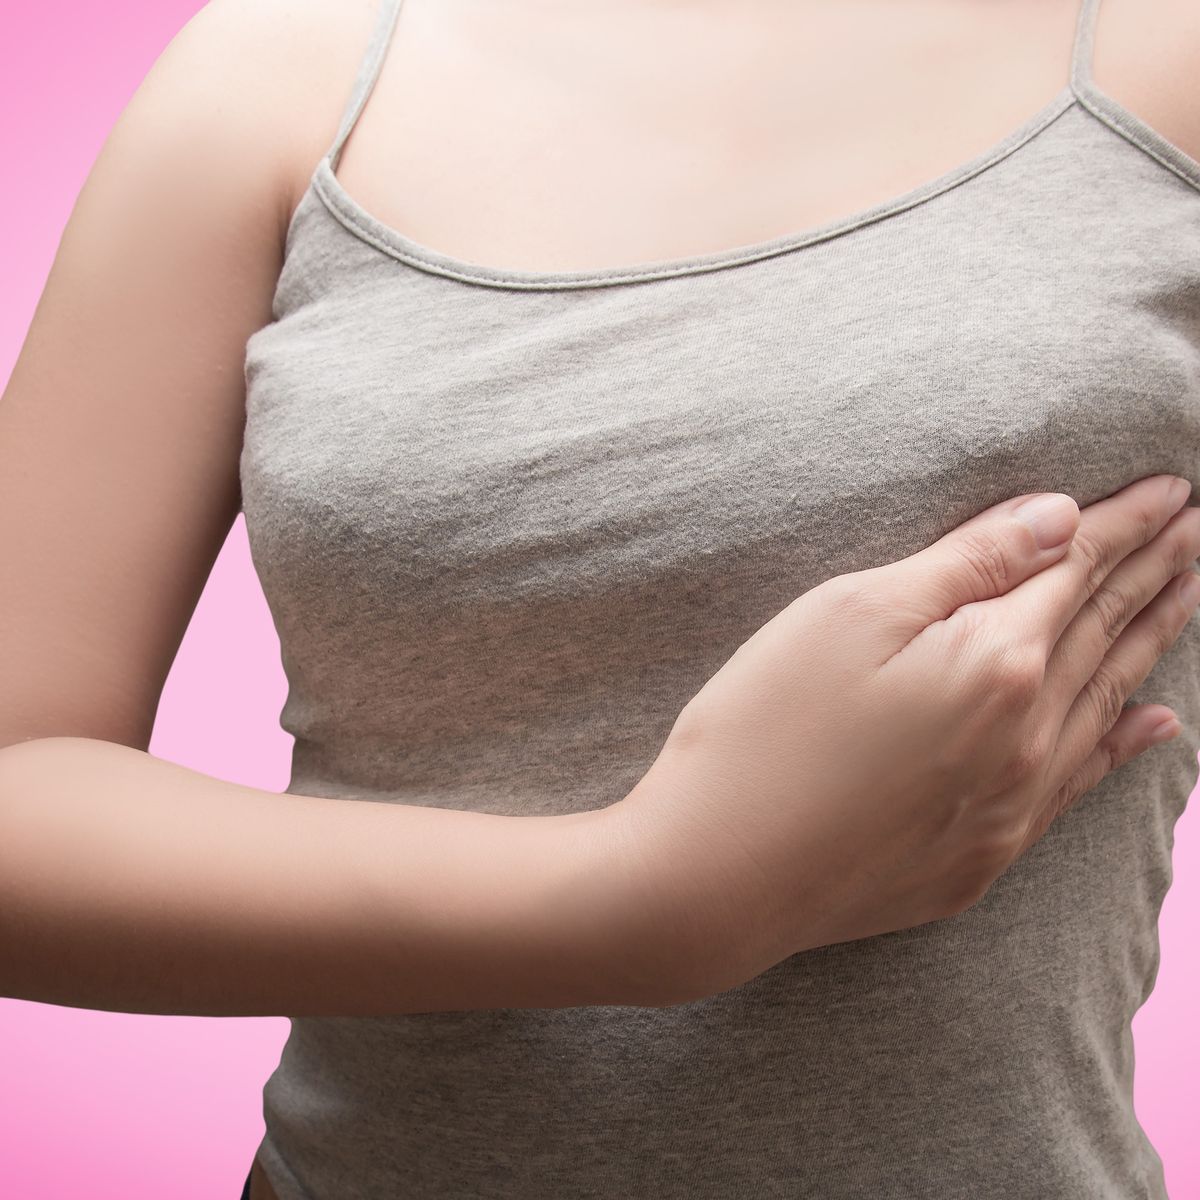 Eight Reasons Your Breasts Hurt